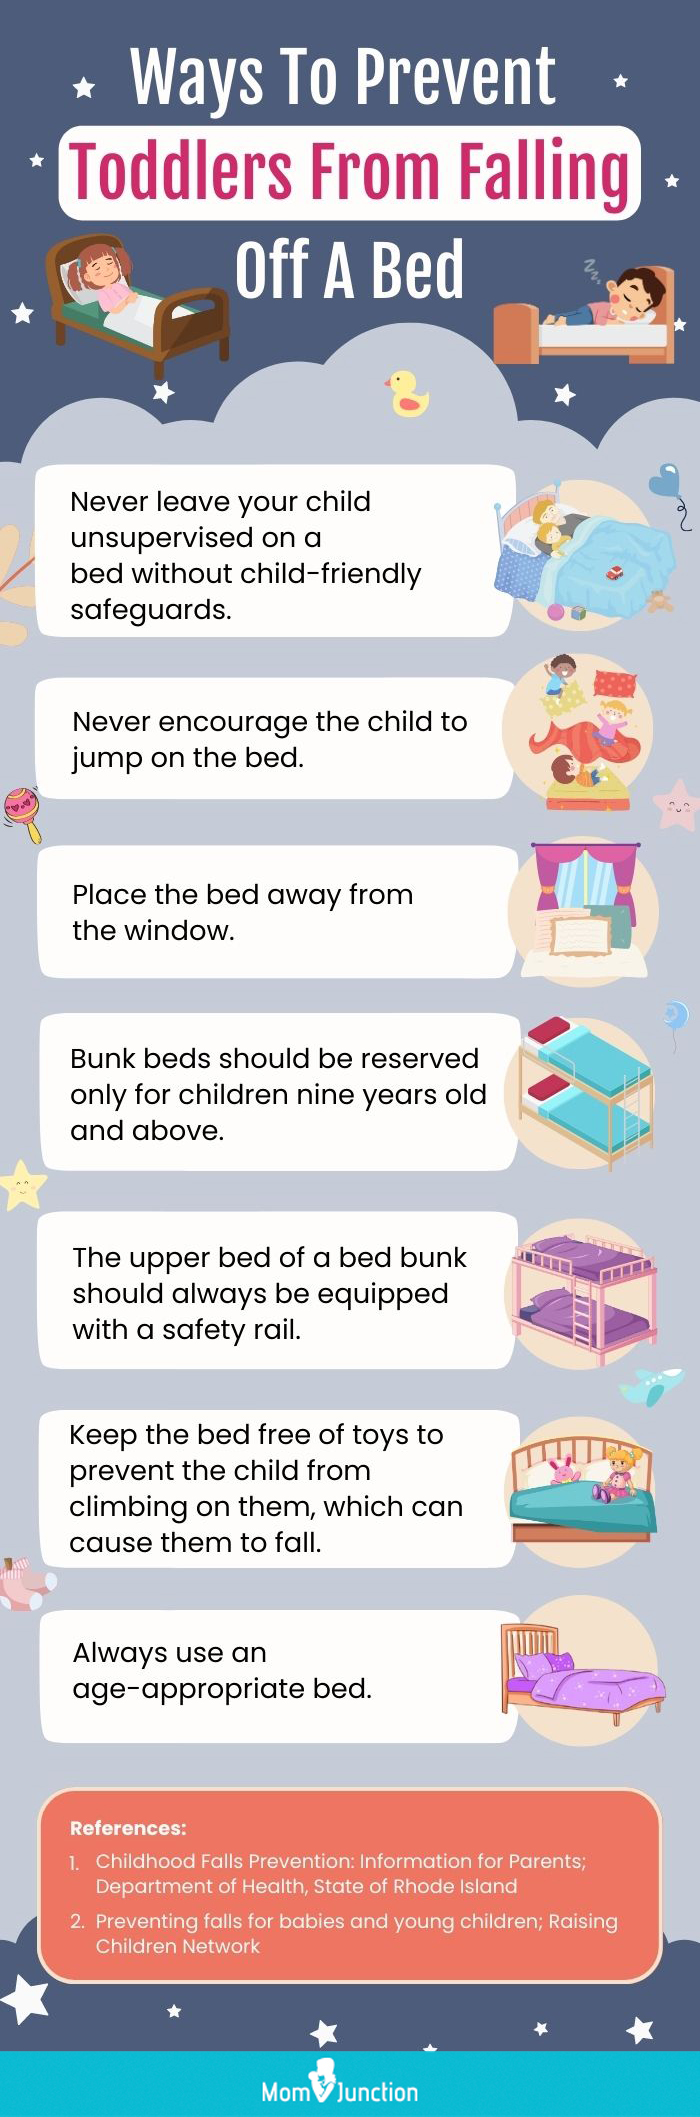 Ways To Prevent Toddlers From Falling Off A Bed (Infographic)